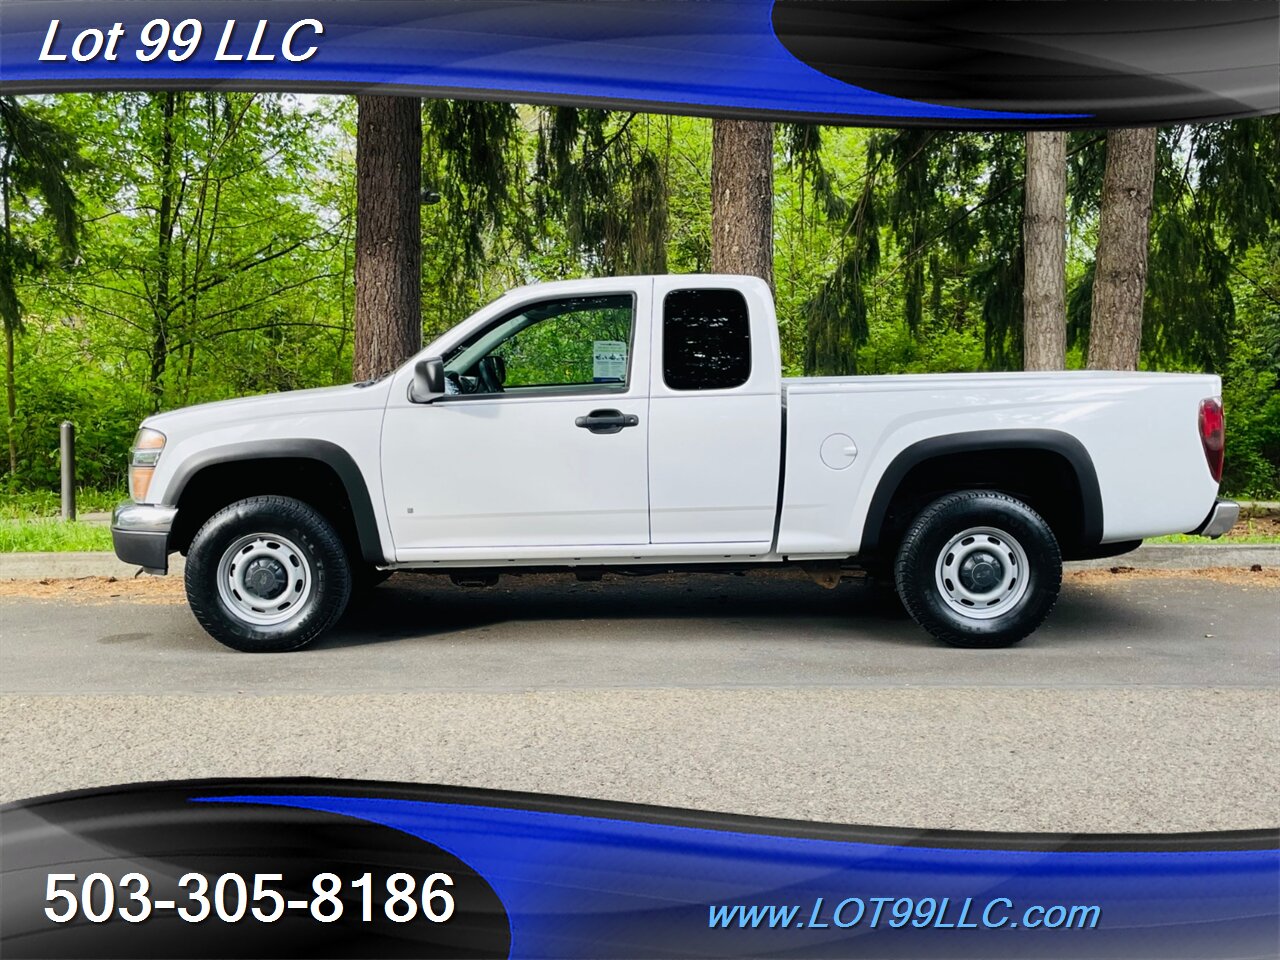 2007 Chevrolet Colorado Extended Cab LT 4x4 6' Bed Vortec 3.7L I5 242hp   - Photo 1 - Milwaukie, OR 97267